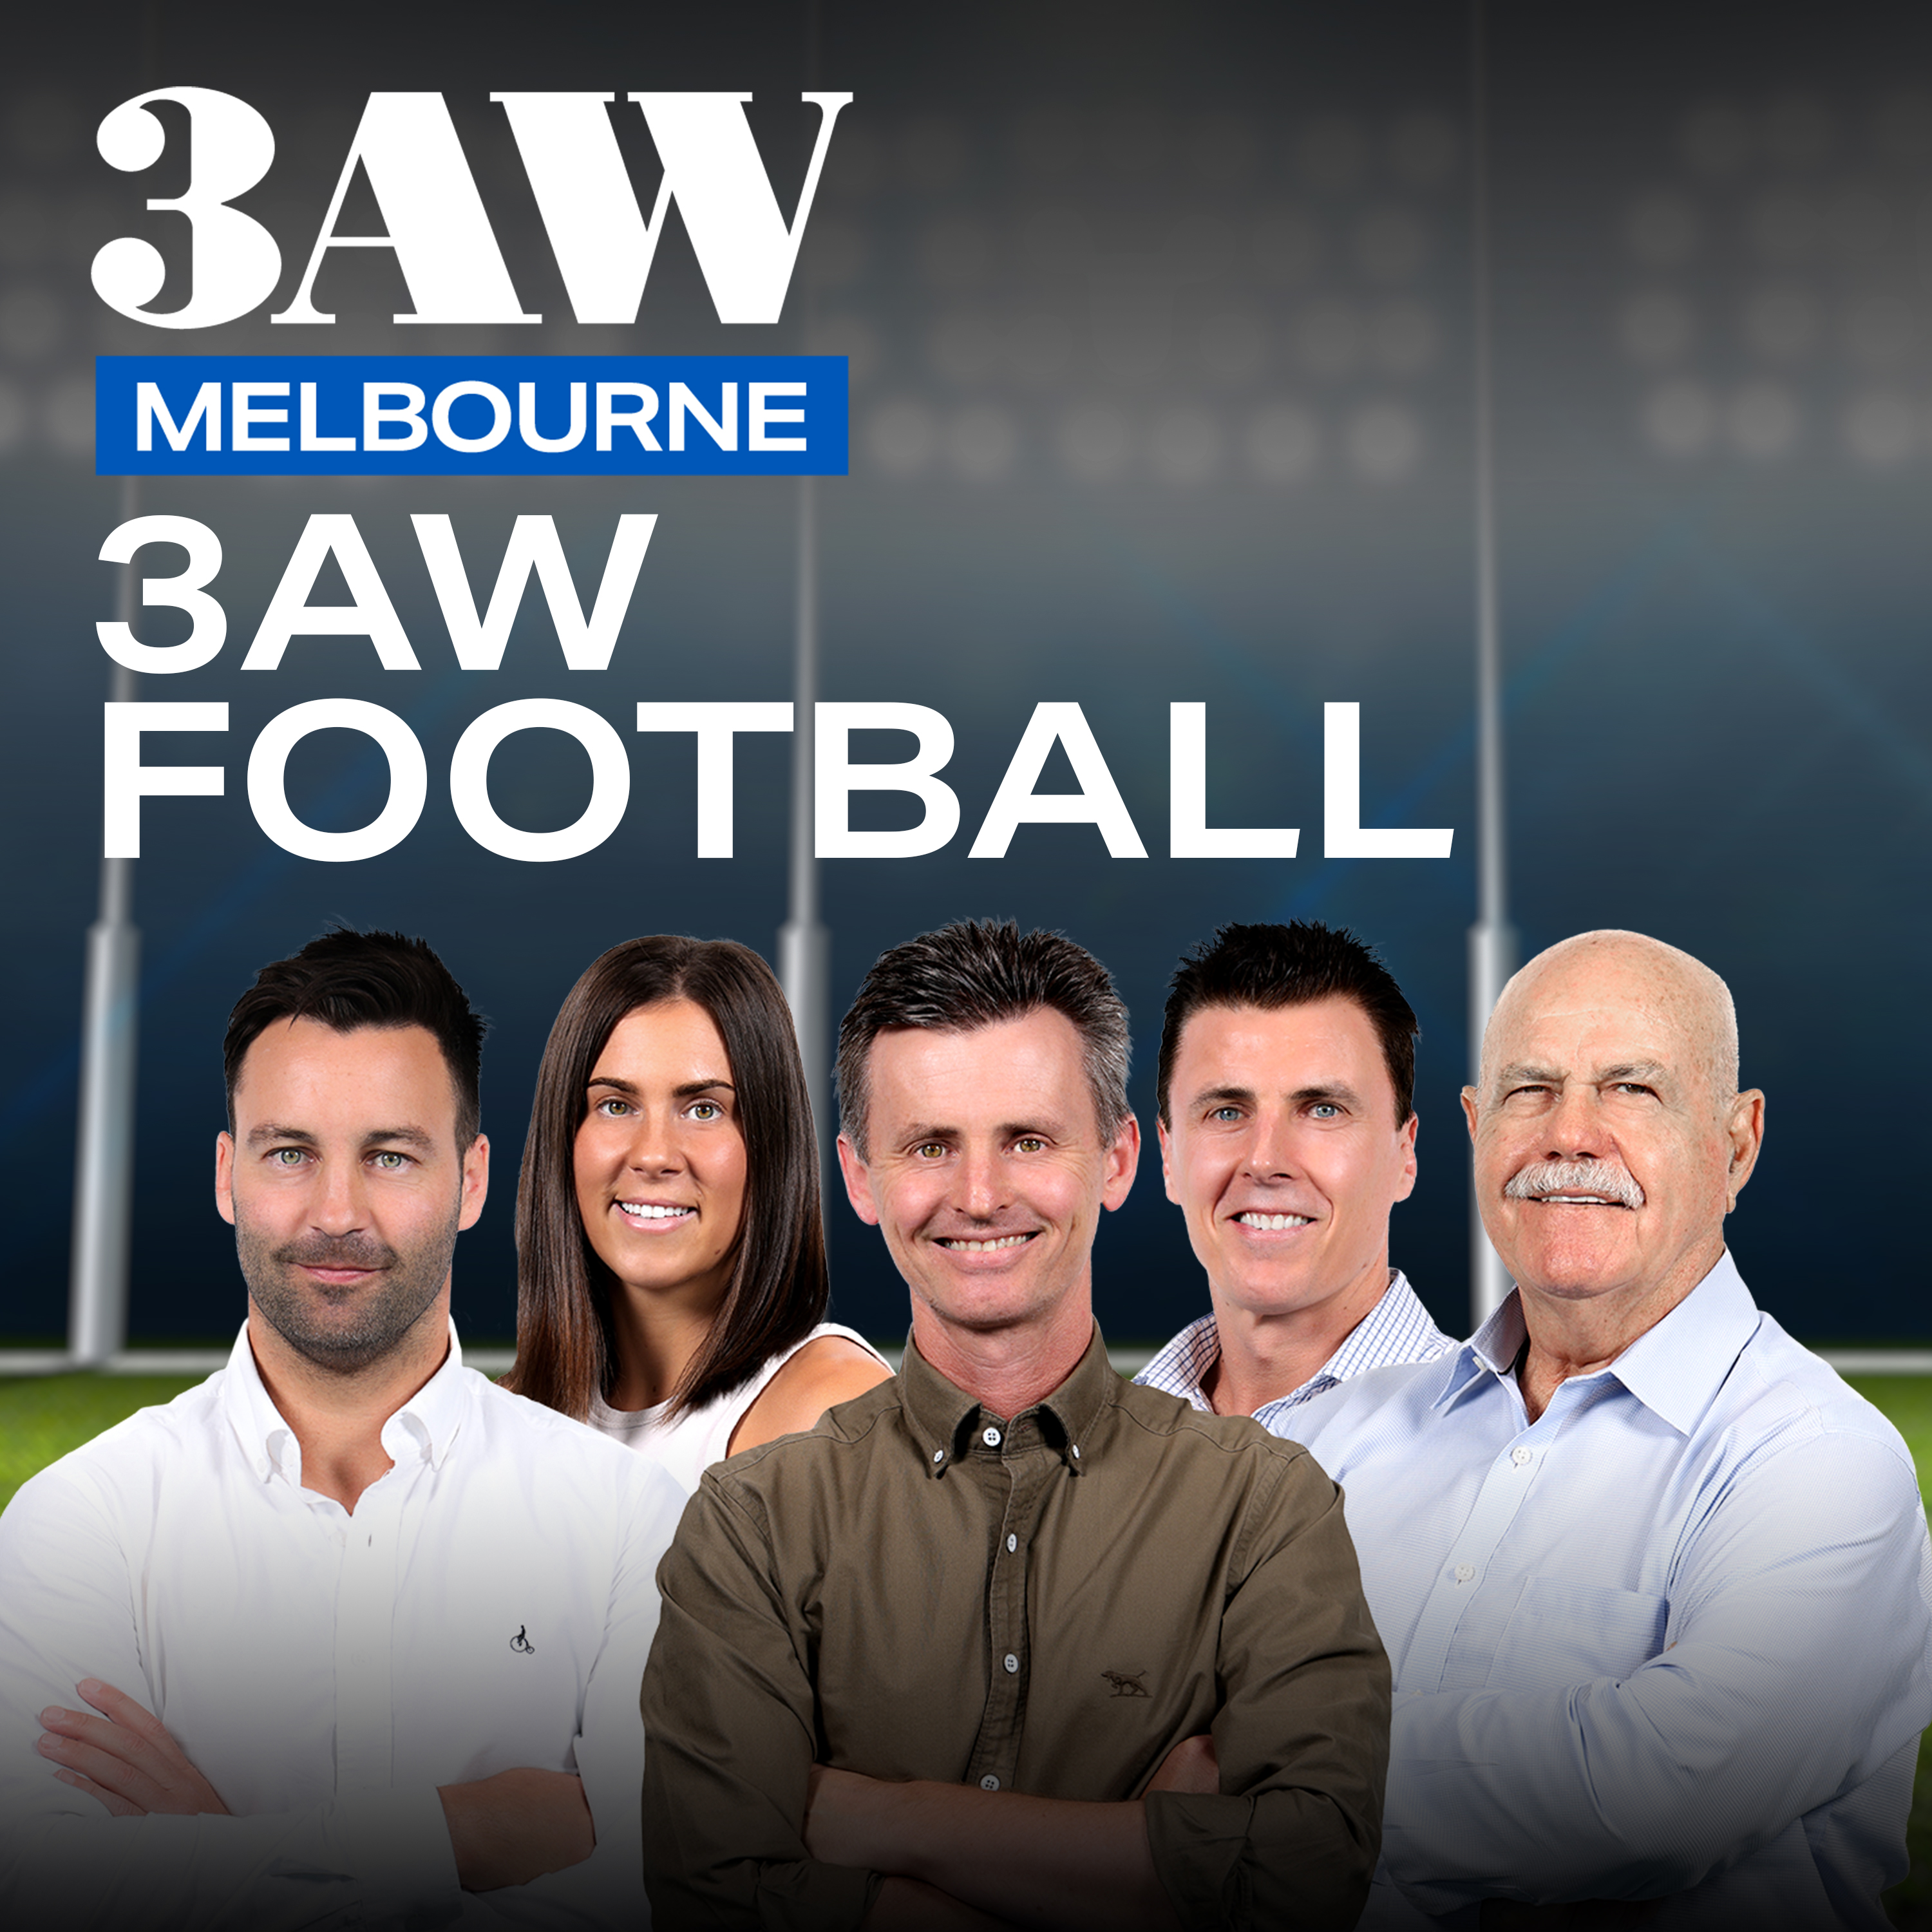 Jeremy Howe speaks to 3AW after Collingwood's season ends